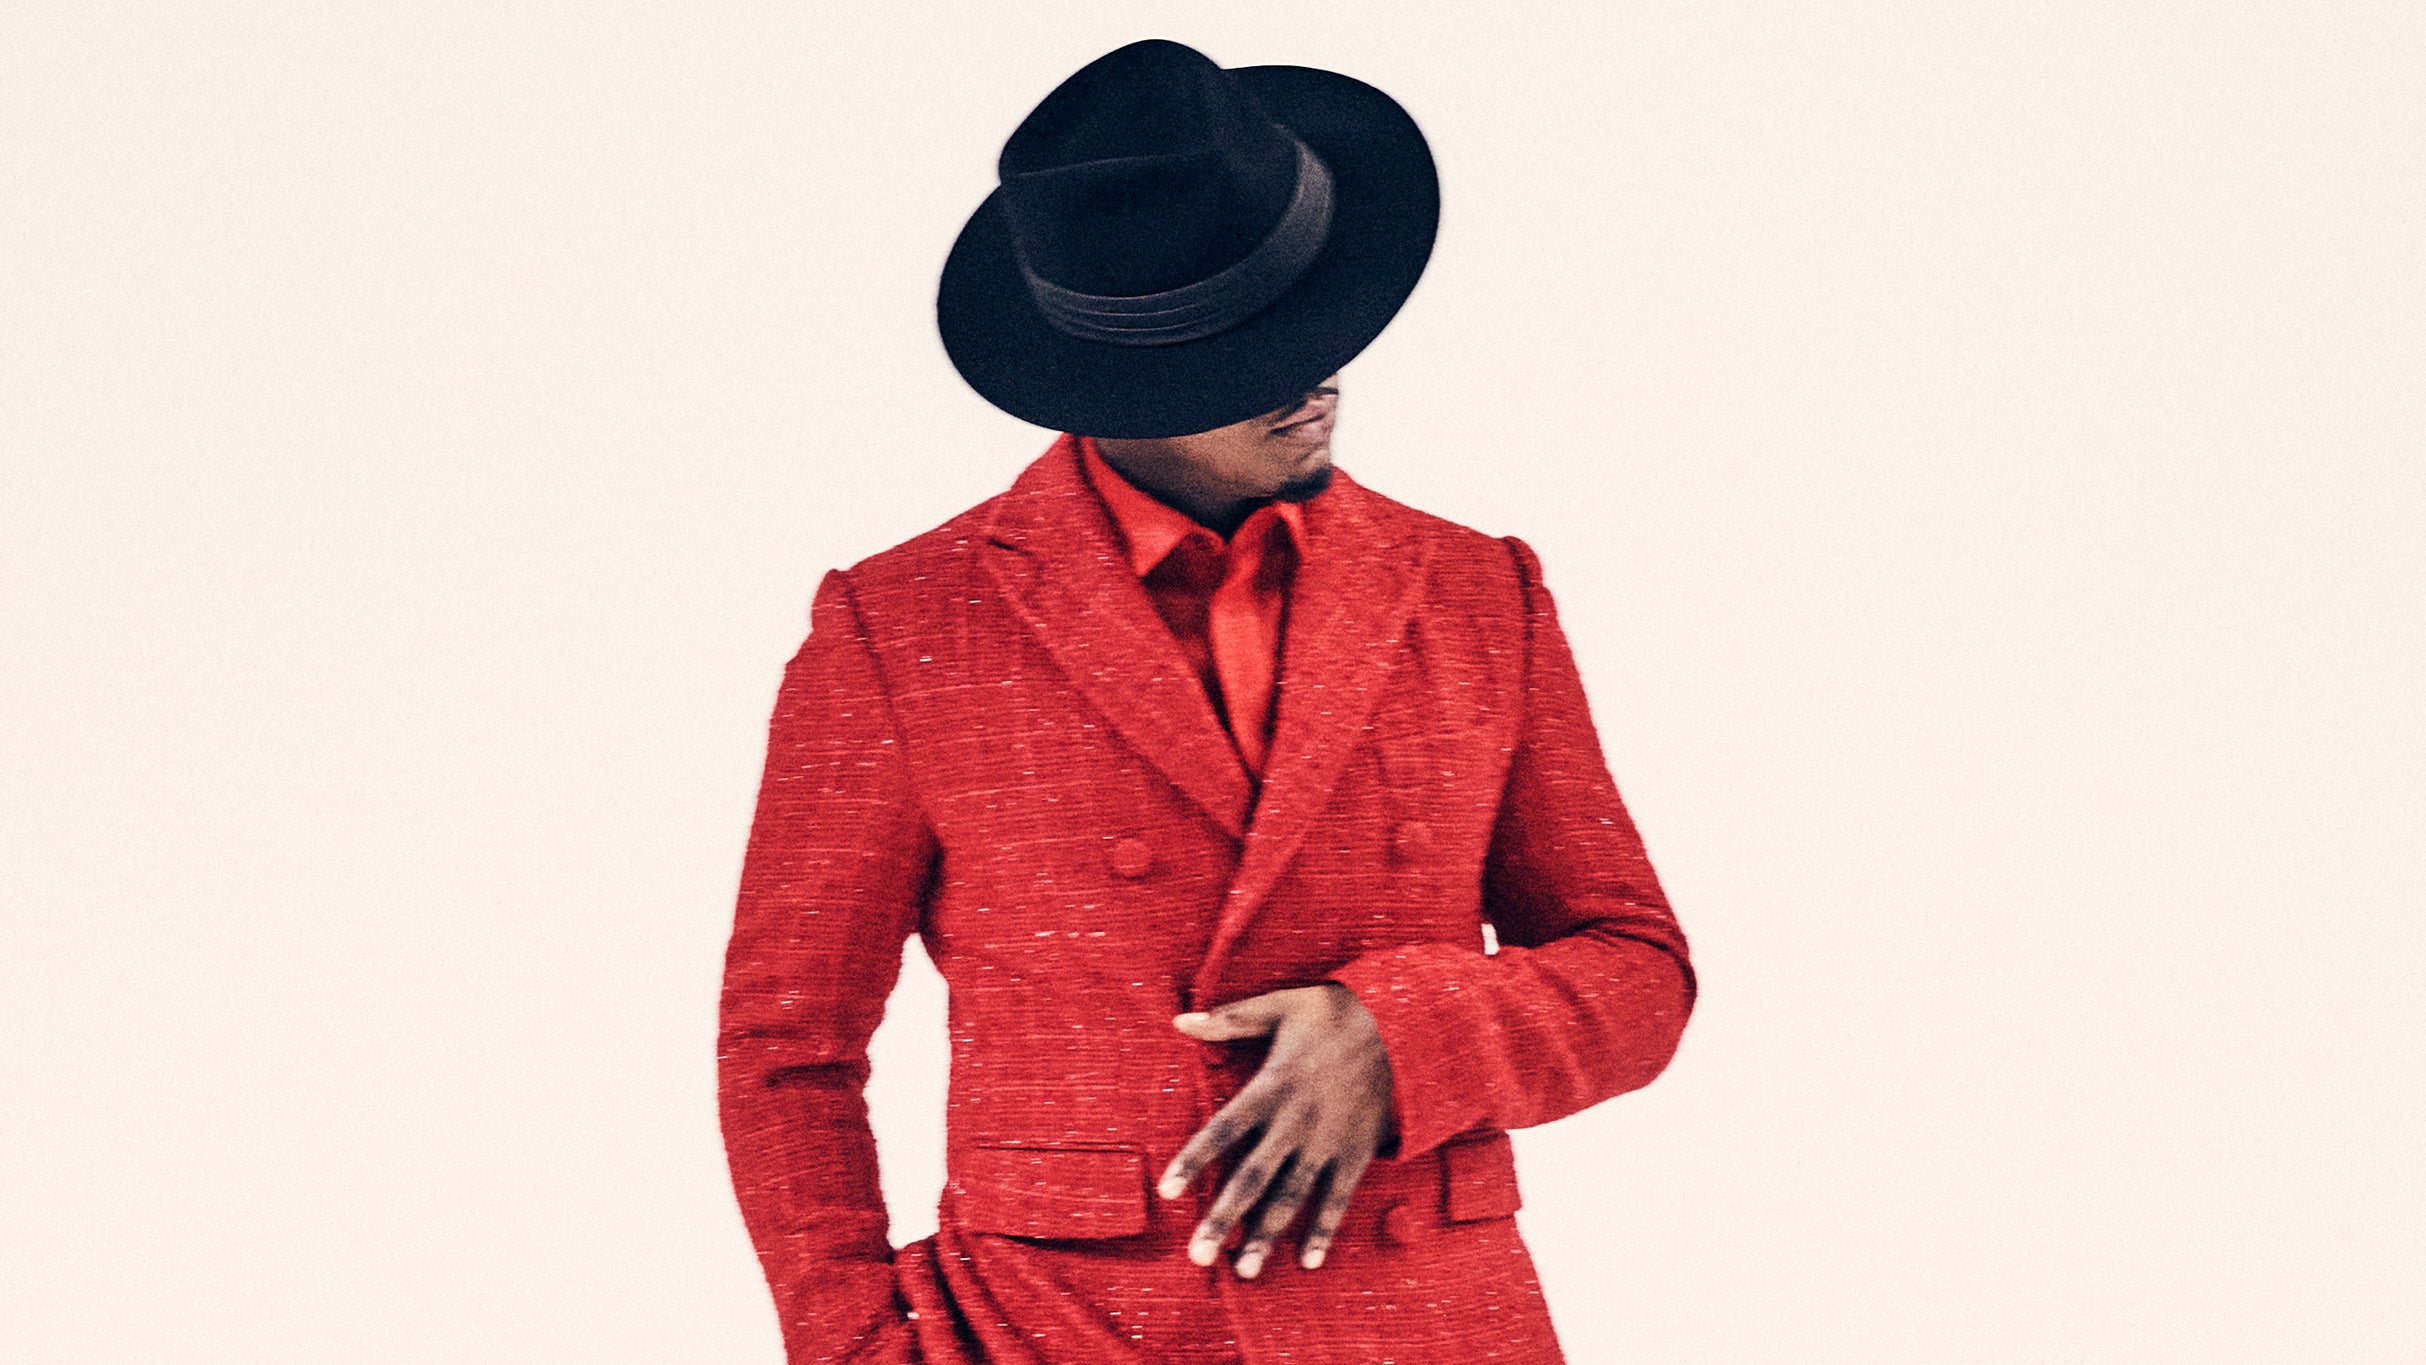 NE-YO: Champagne and Roses Tour with Robin Thicke and Mario free presale pasword